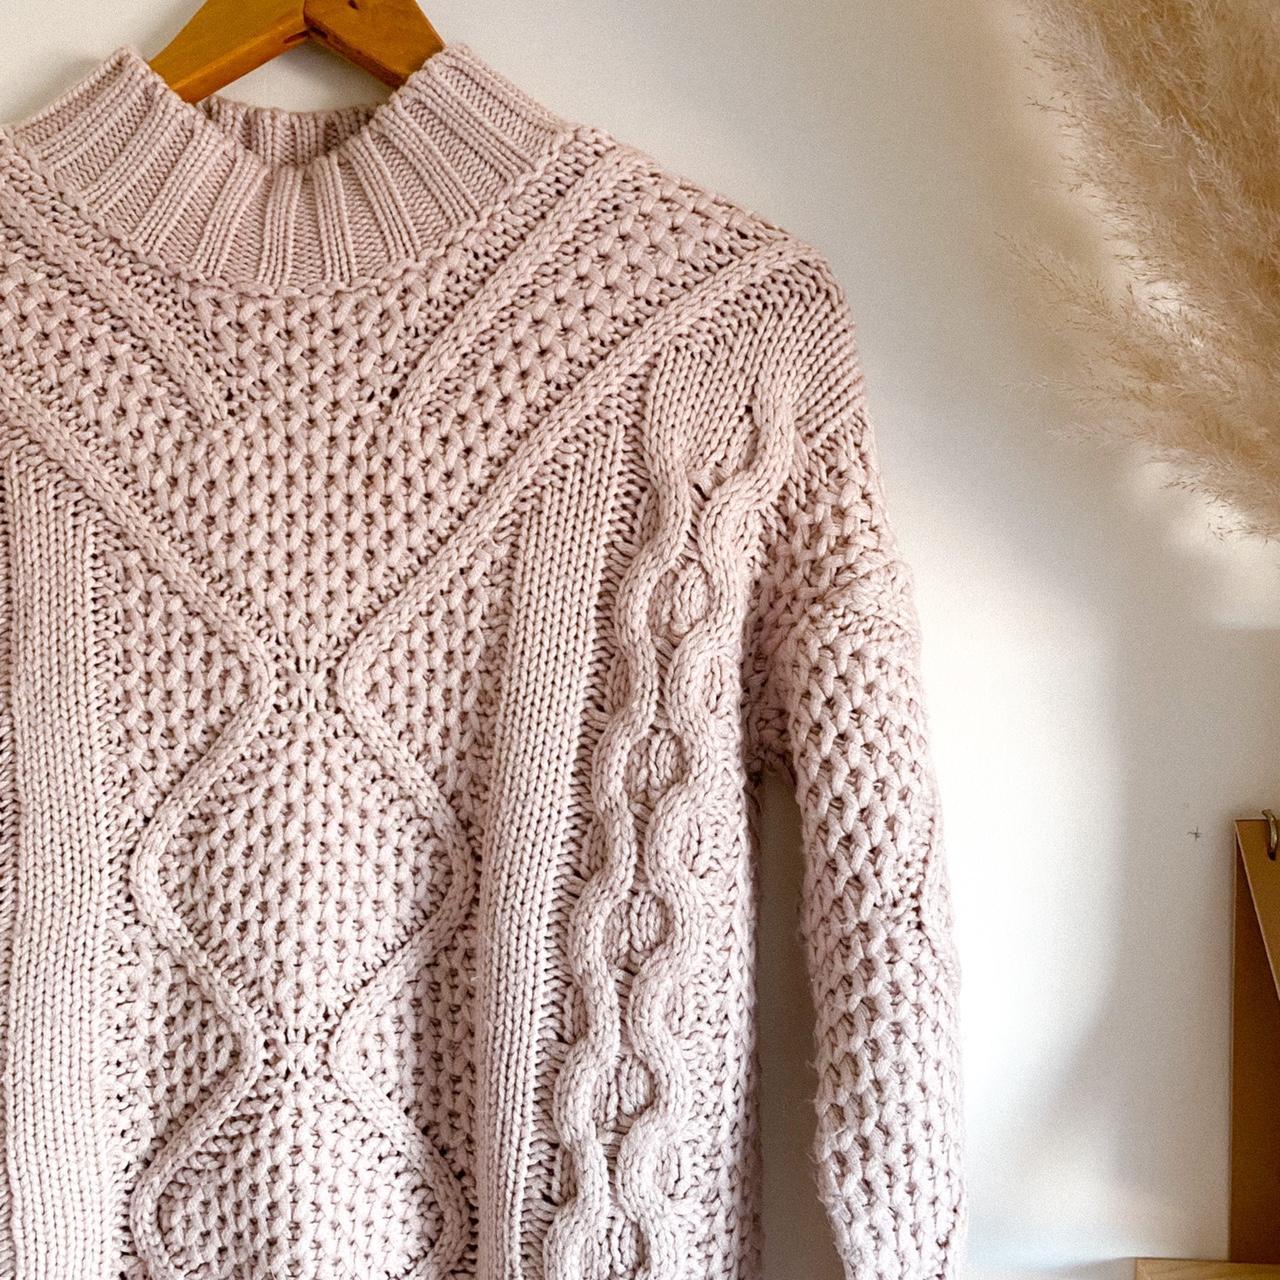 Product Image 2 - Cable knit sweater in dust